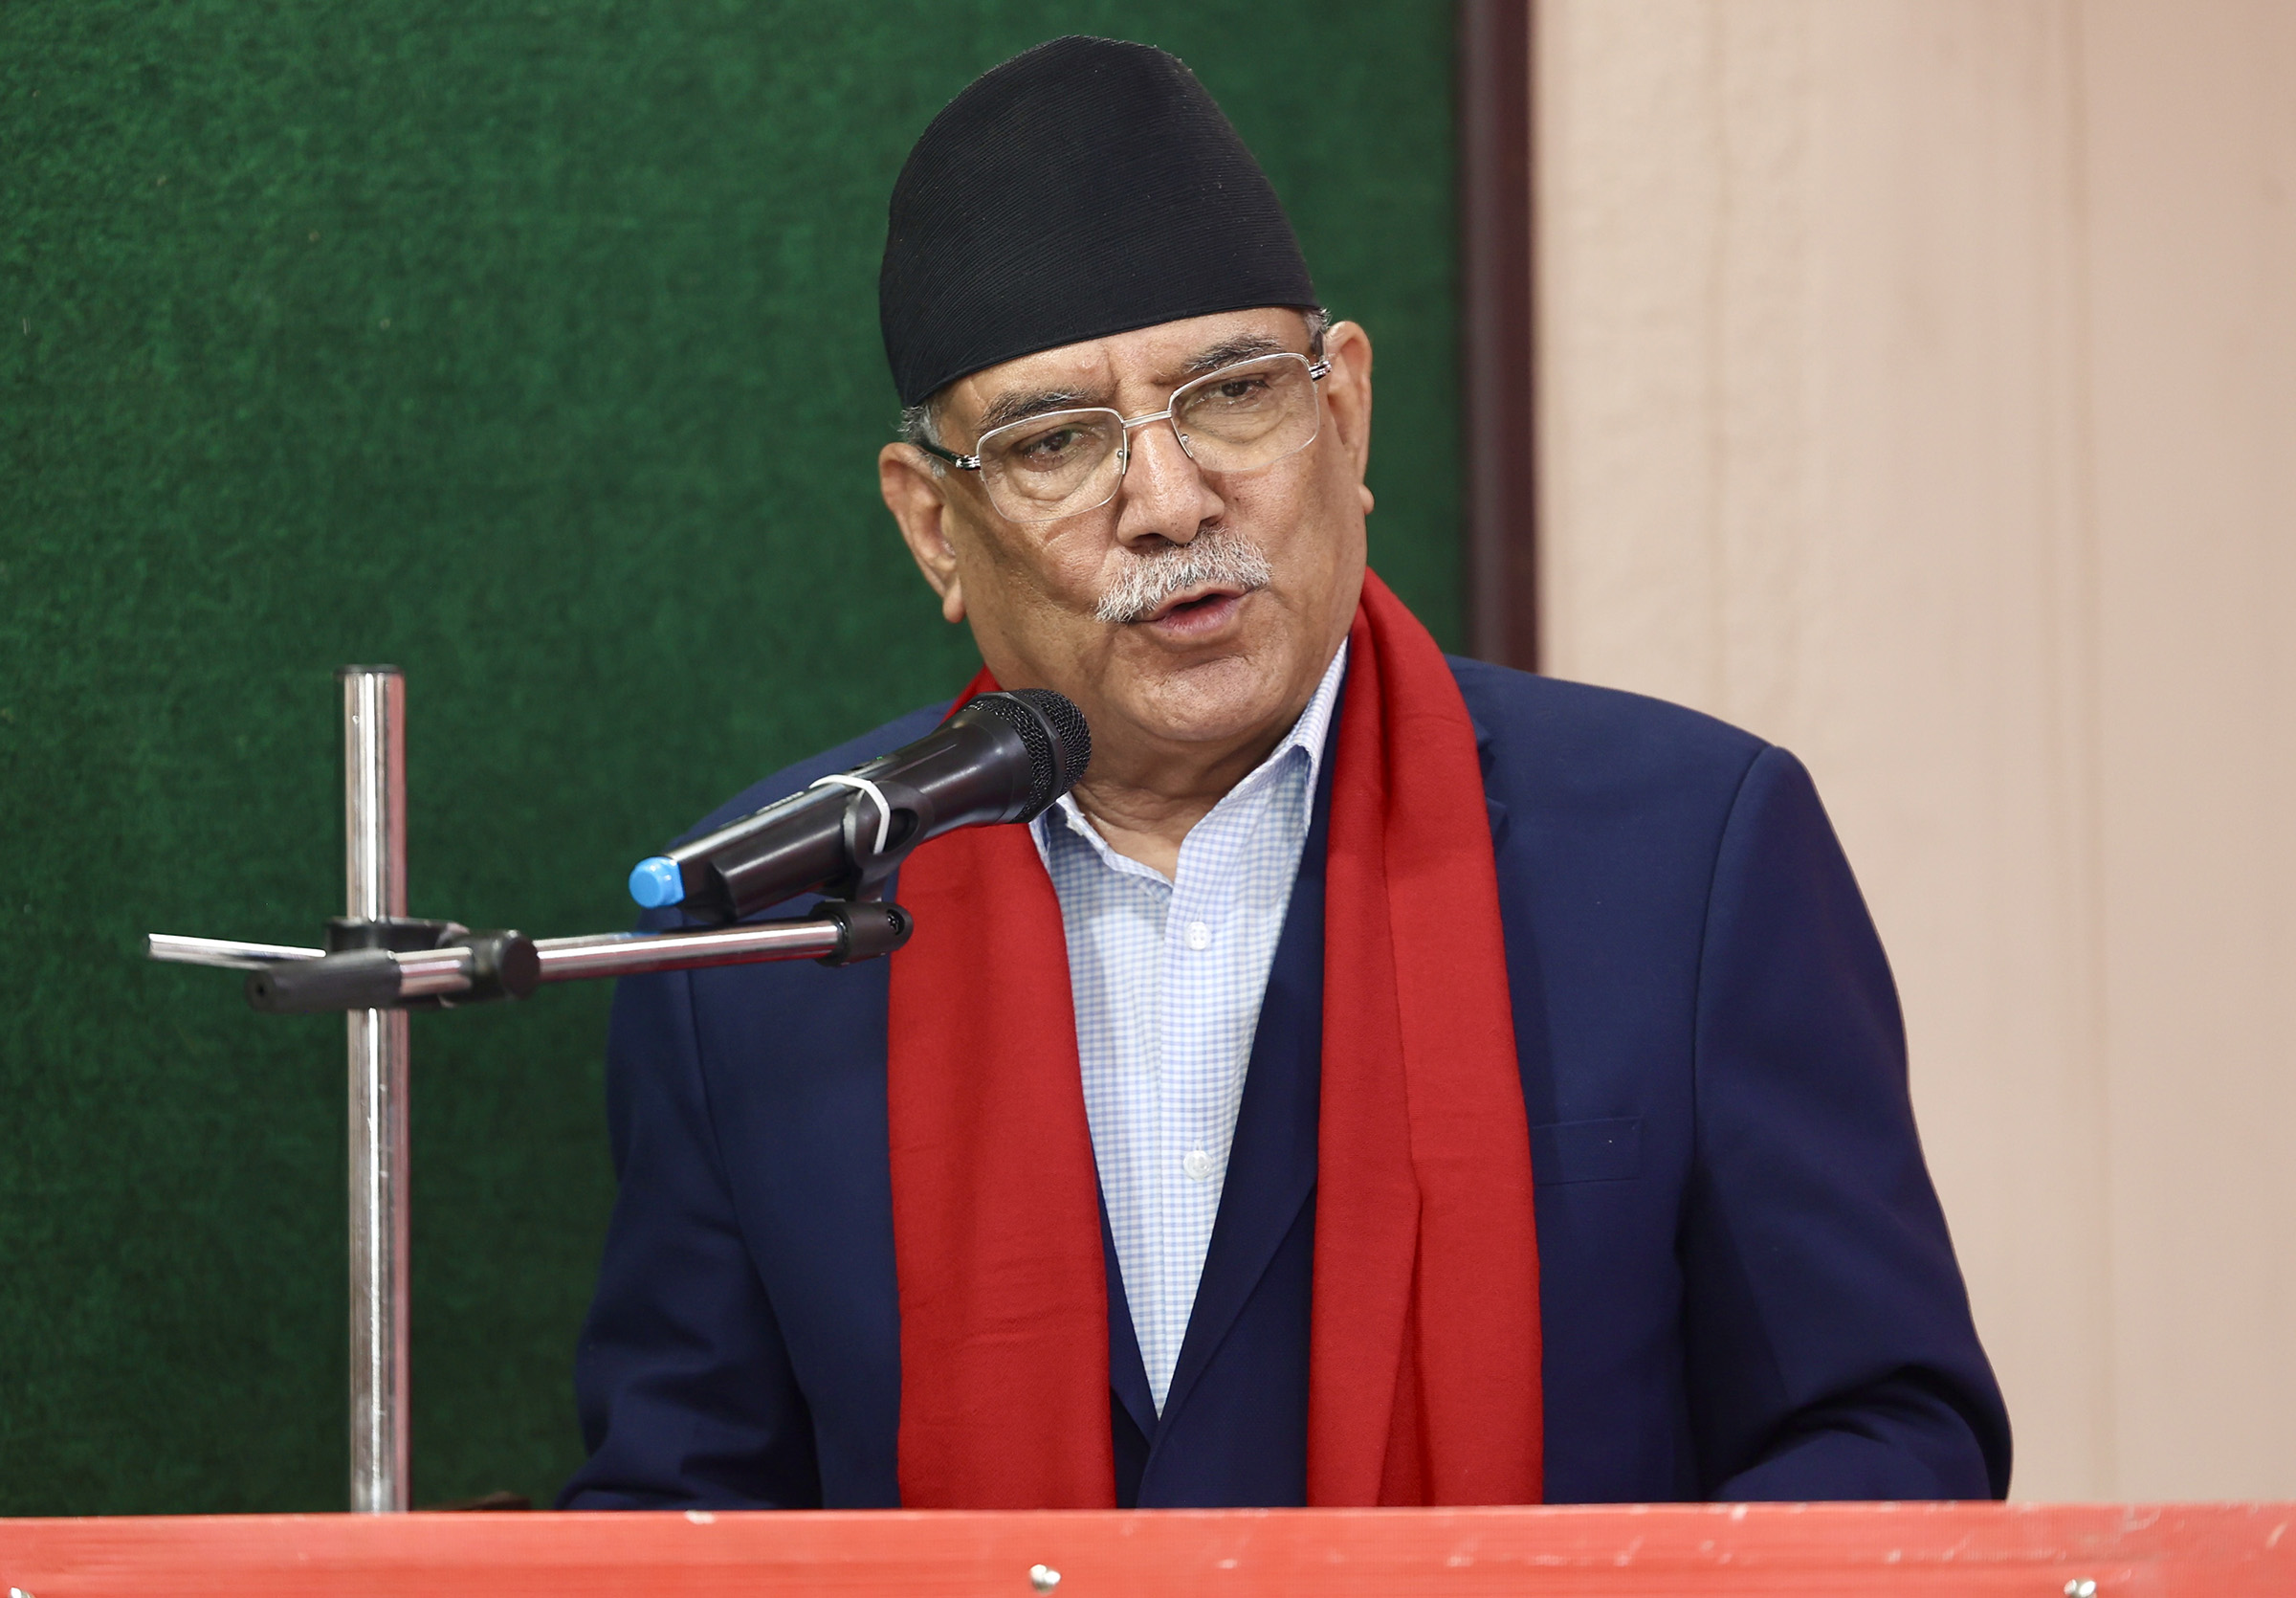 Eastern region will get priority in coming budget: PM Dahal